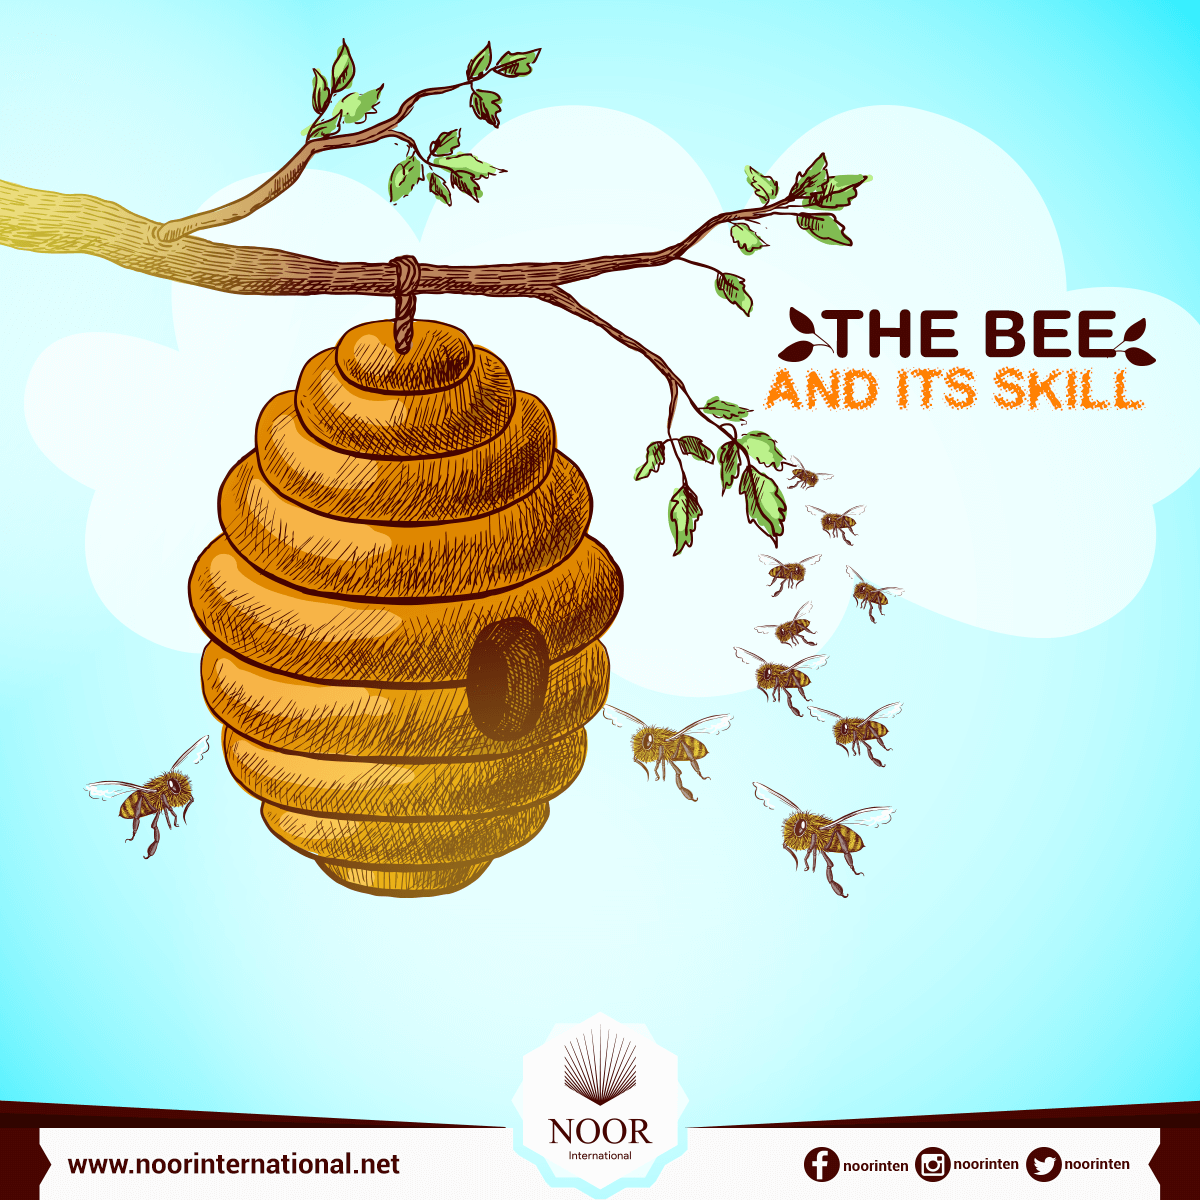 THE BEE AND ITS SKILL